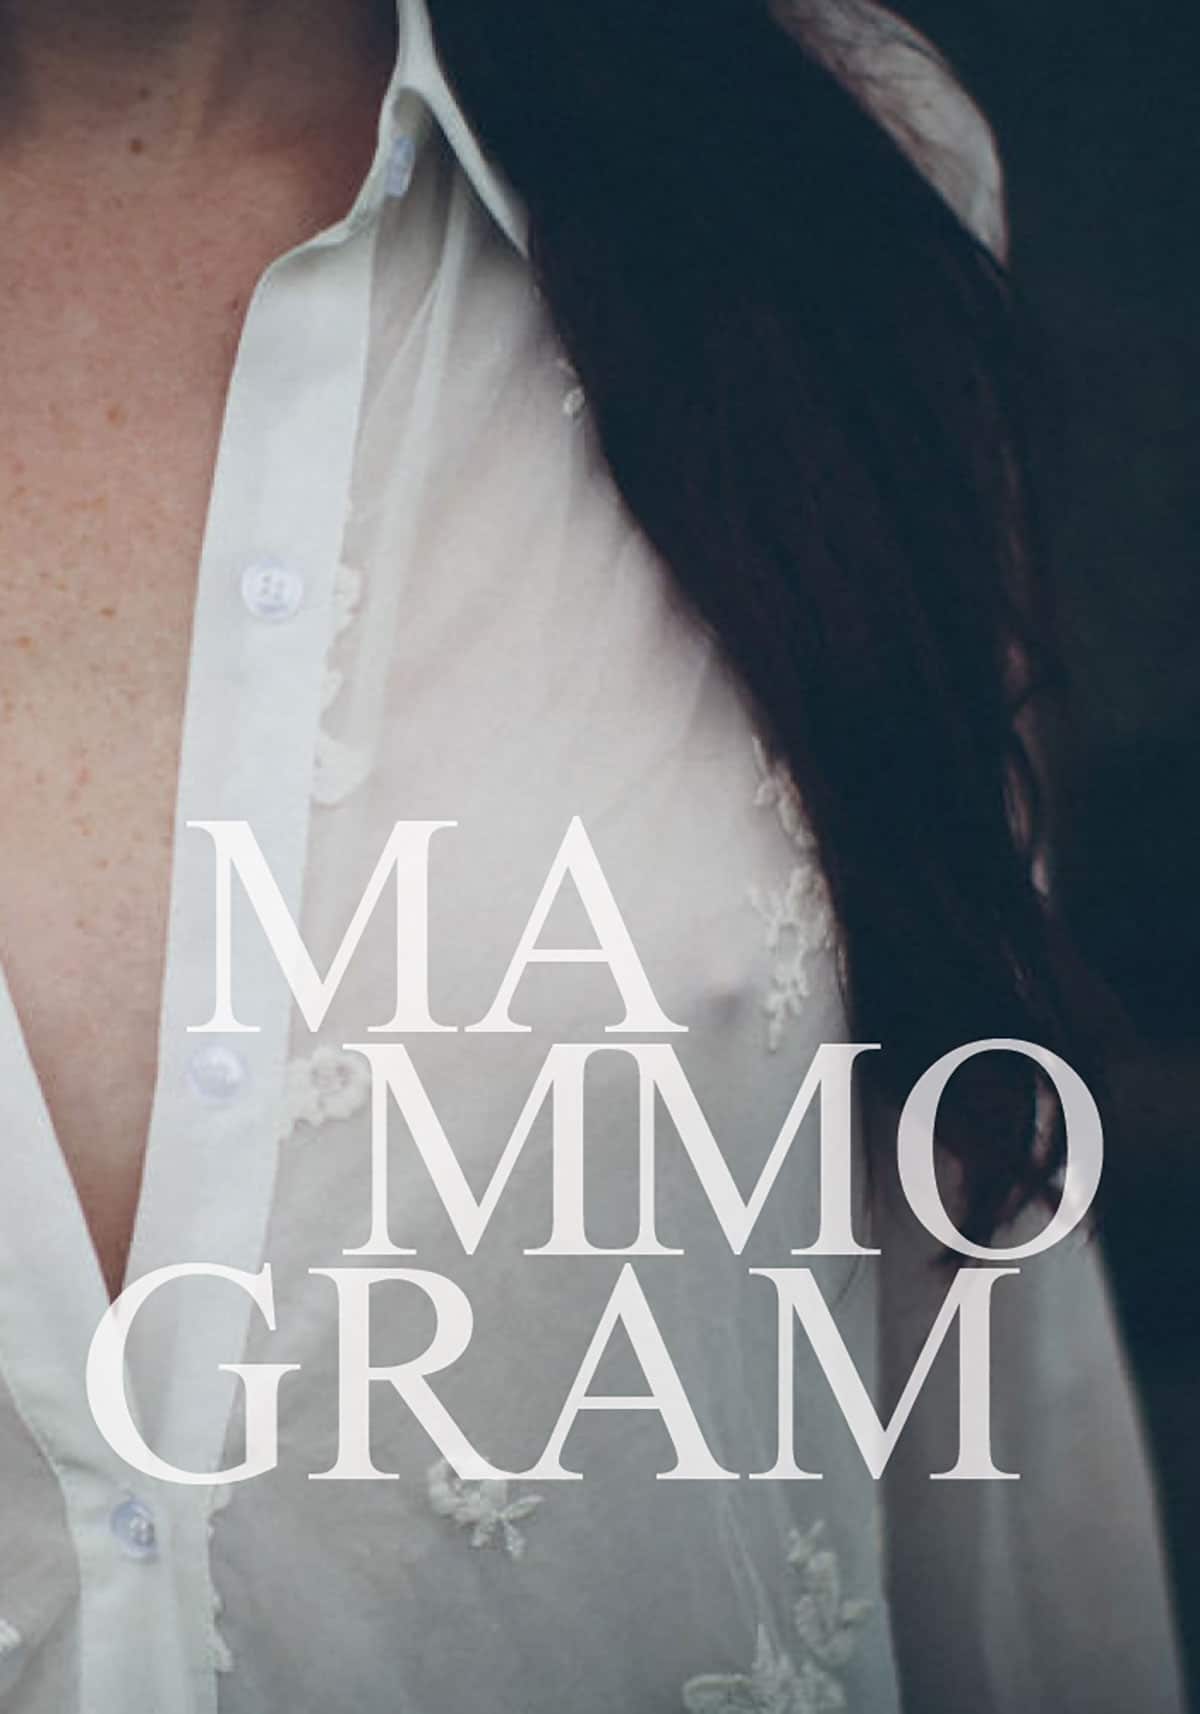 Personal Account Of First Mammogram - The story of my first mammogram. You have questions? I've got answers.